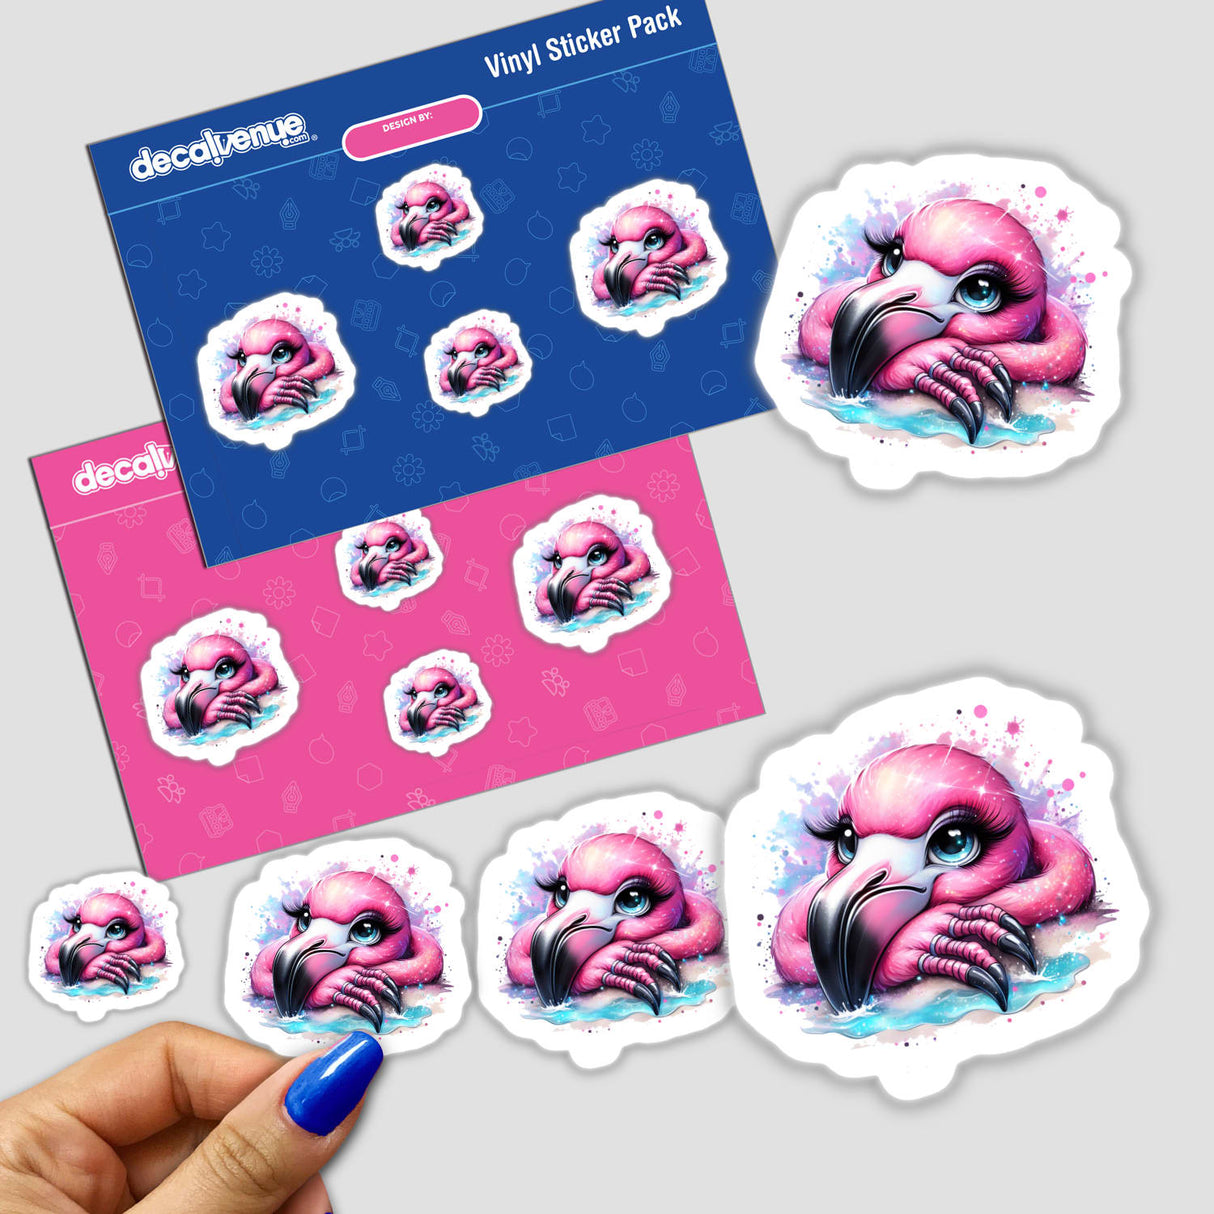 Vibrant pink flamingo digital artwork stickers featuring a detailed, whimsical design displayed in a Decal Venue vinyl sticker pack.